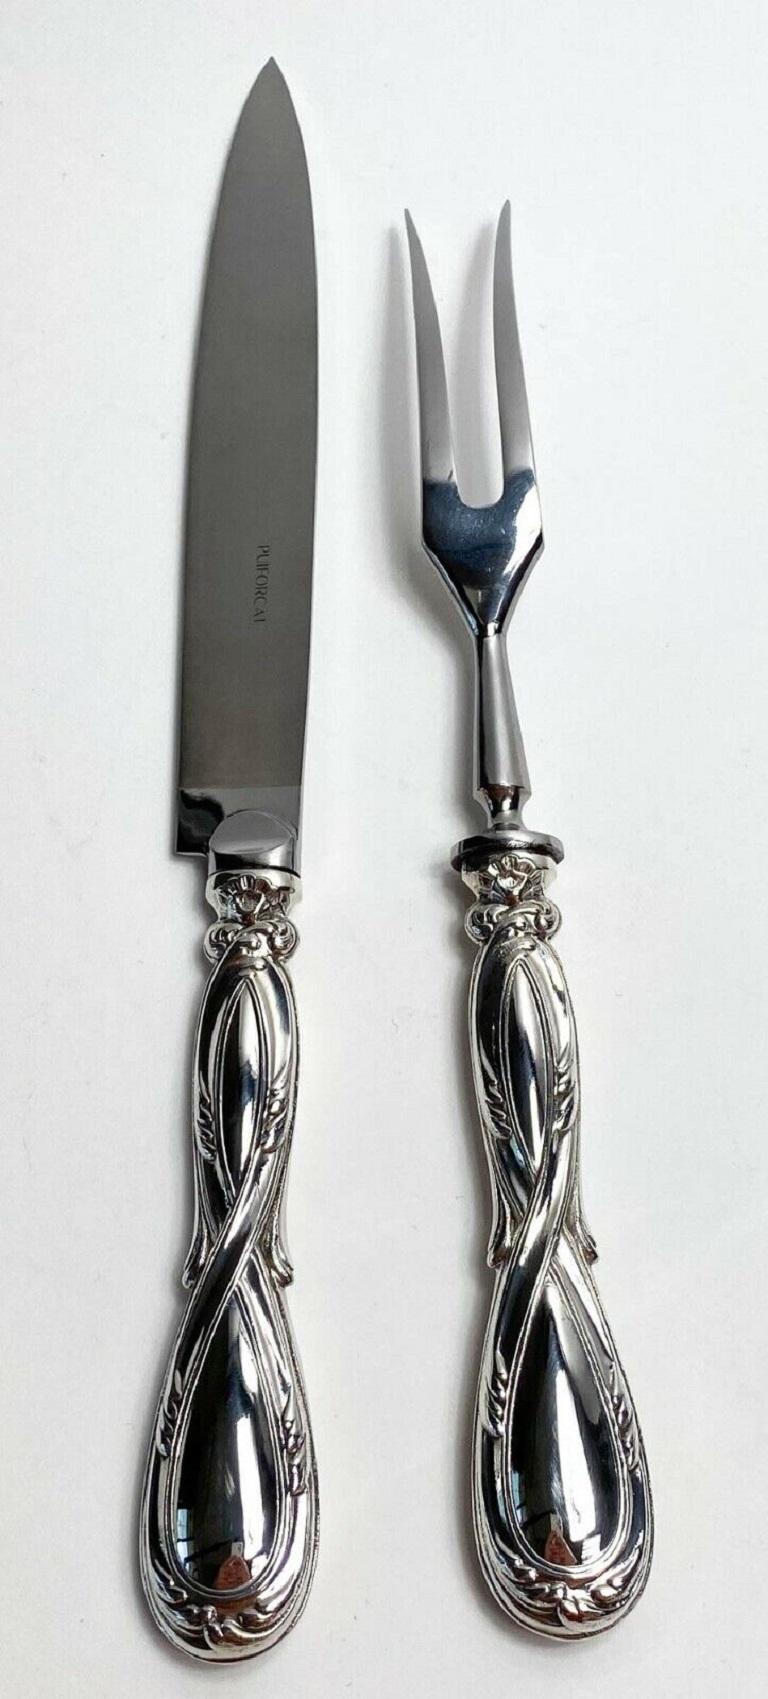 Pair Emile Puiforcat France Sterling Silver Carving Knife & Fork in Royal Pattern. Knife with a stainless steel blade. Fork marked Inox to base, knife marked Puiforcat to the blade.

Additional information:
Composition: Sterling Silver 
Brand: